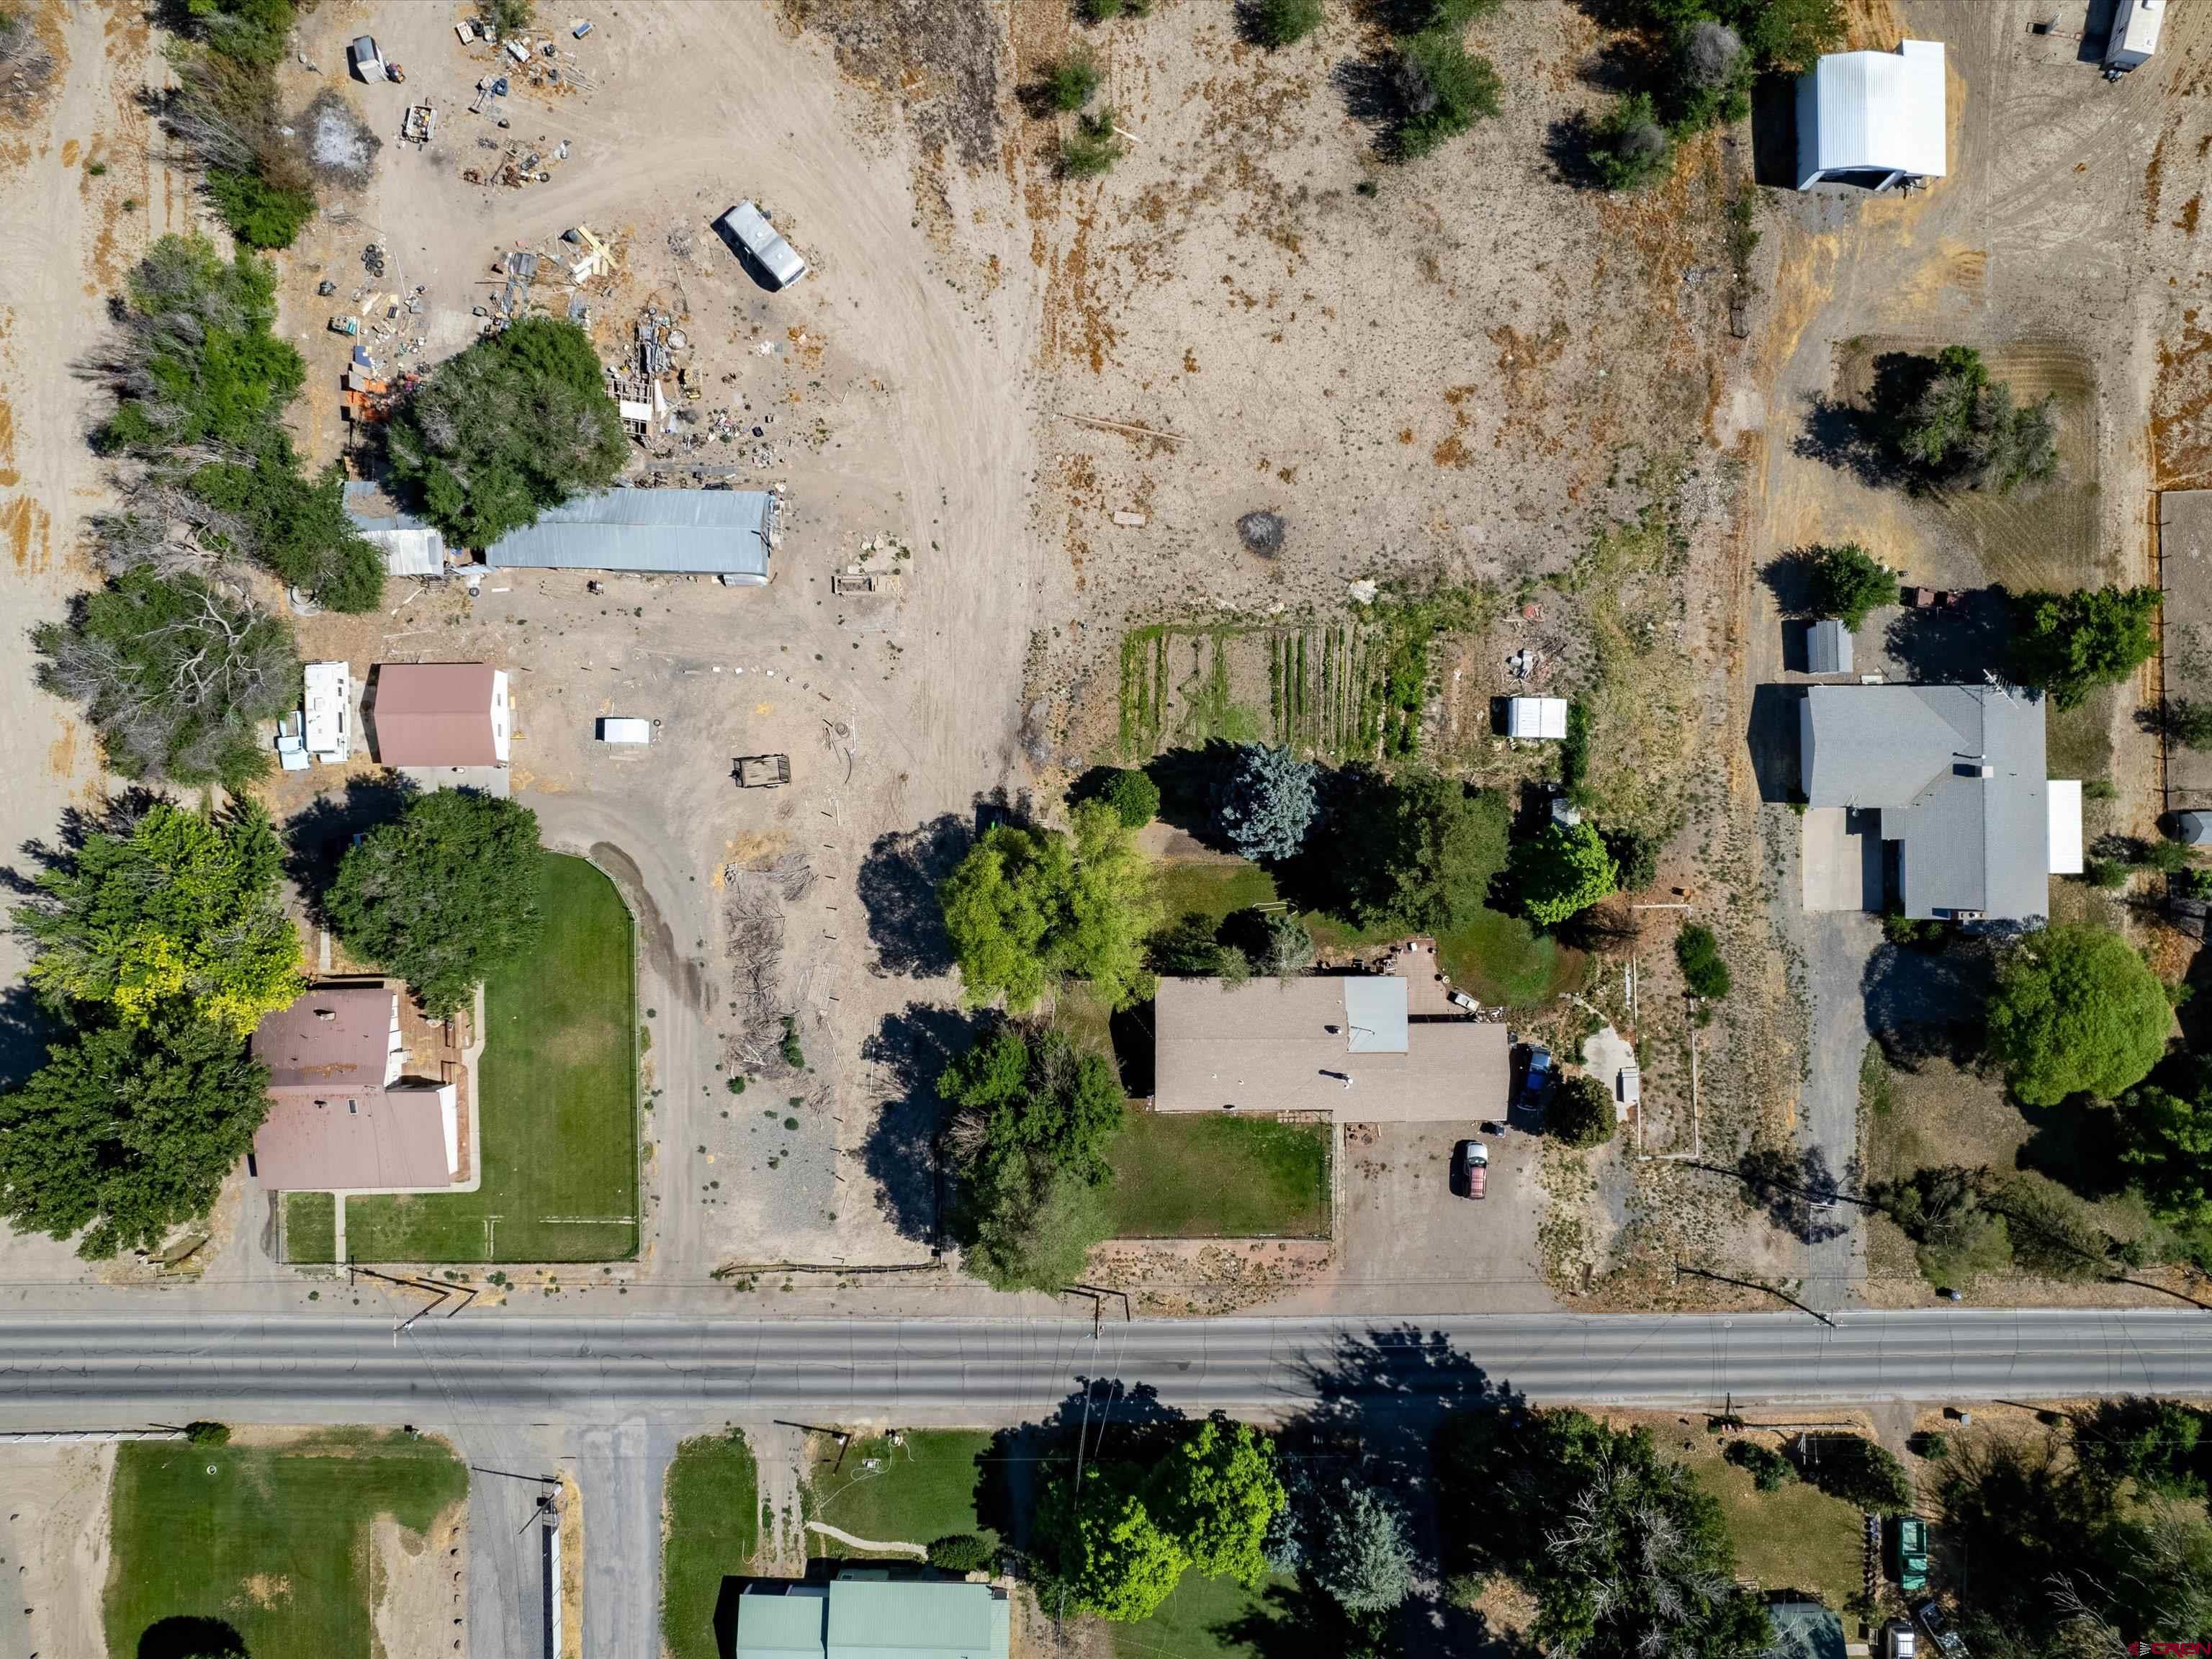 Discover an exceptional investment opportunity at Lot 2 Dougan 5th St, Delta, CO, 81416. Nestled in the Dougan Subdivision, this sprawling 3.469-acre semi-rural parcel of land is ready and waiting for your development dreams to become reality. With a competitive price tag of $154,000, this sizeable plot provides a myriad of possibilities, making it the perfect choice for developers, home builders, or those seeking an expansive site for a single-family home. ??Imagine a community of custom homes against the backdrop of breathtaking mountain views, enhanced by the availability of irrigation water. Additionally, there is a platted street that extends through both Lot 1, encompassing 1.1 acres, and Lot 2, adding an extra layer of convenience for potential development. For those with larger scale visions, both lots can be purchased together for $229,000, creating an unparalleled opportunity for expansion.??This is a chance to shape a piece of the Delta landscape into something extraordinary. Whether you envision a family-oriented neighborhood or a collection of beautiful homes, this acreage is the canvas upon which your development dreams can come to life. Don't miss this unique opportunity to secure a sizeable piece of the Delta real estate market. Contact us today to explore the full potential of Lot 2 Dougan Subdivision.